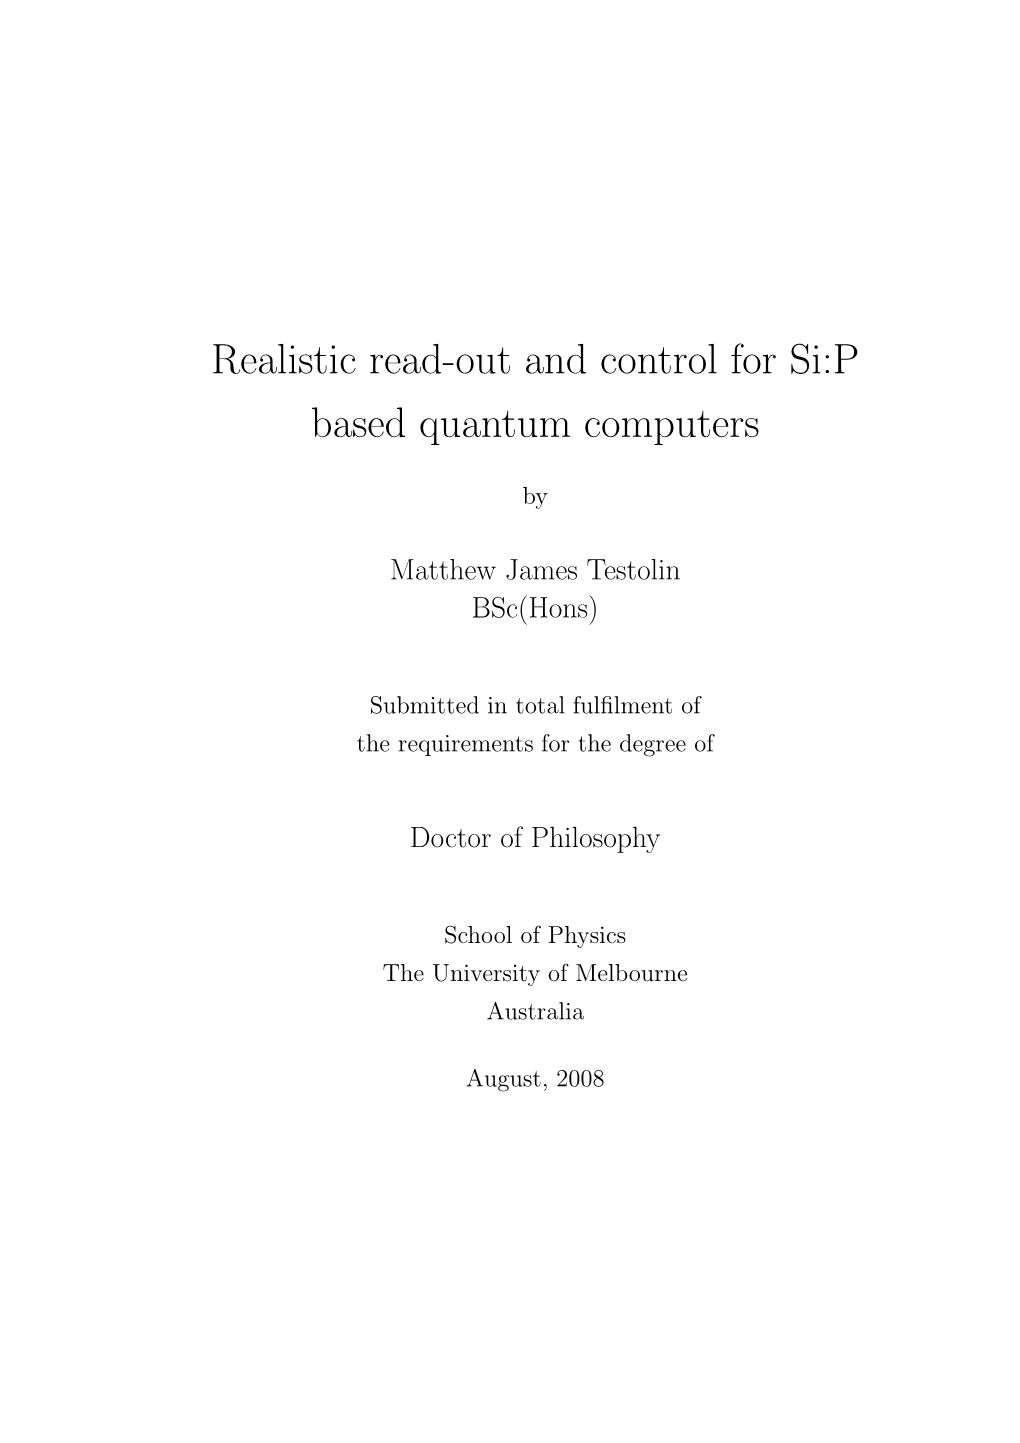 Realistic Read-Out and Control for Si:P Based Quantum Computers